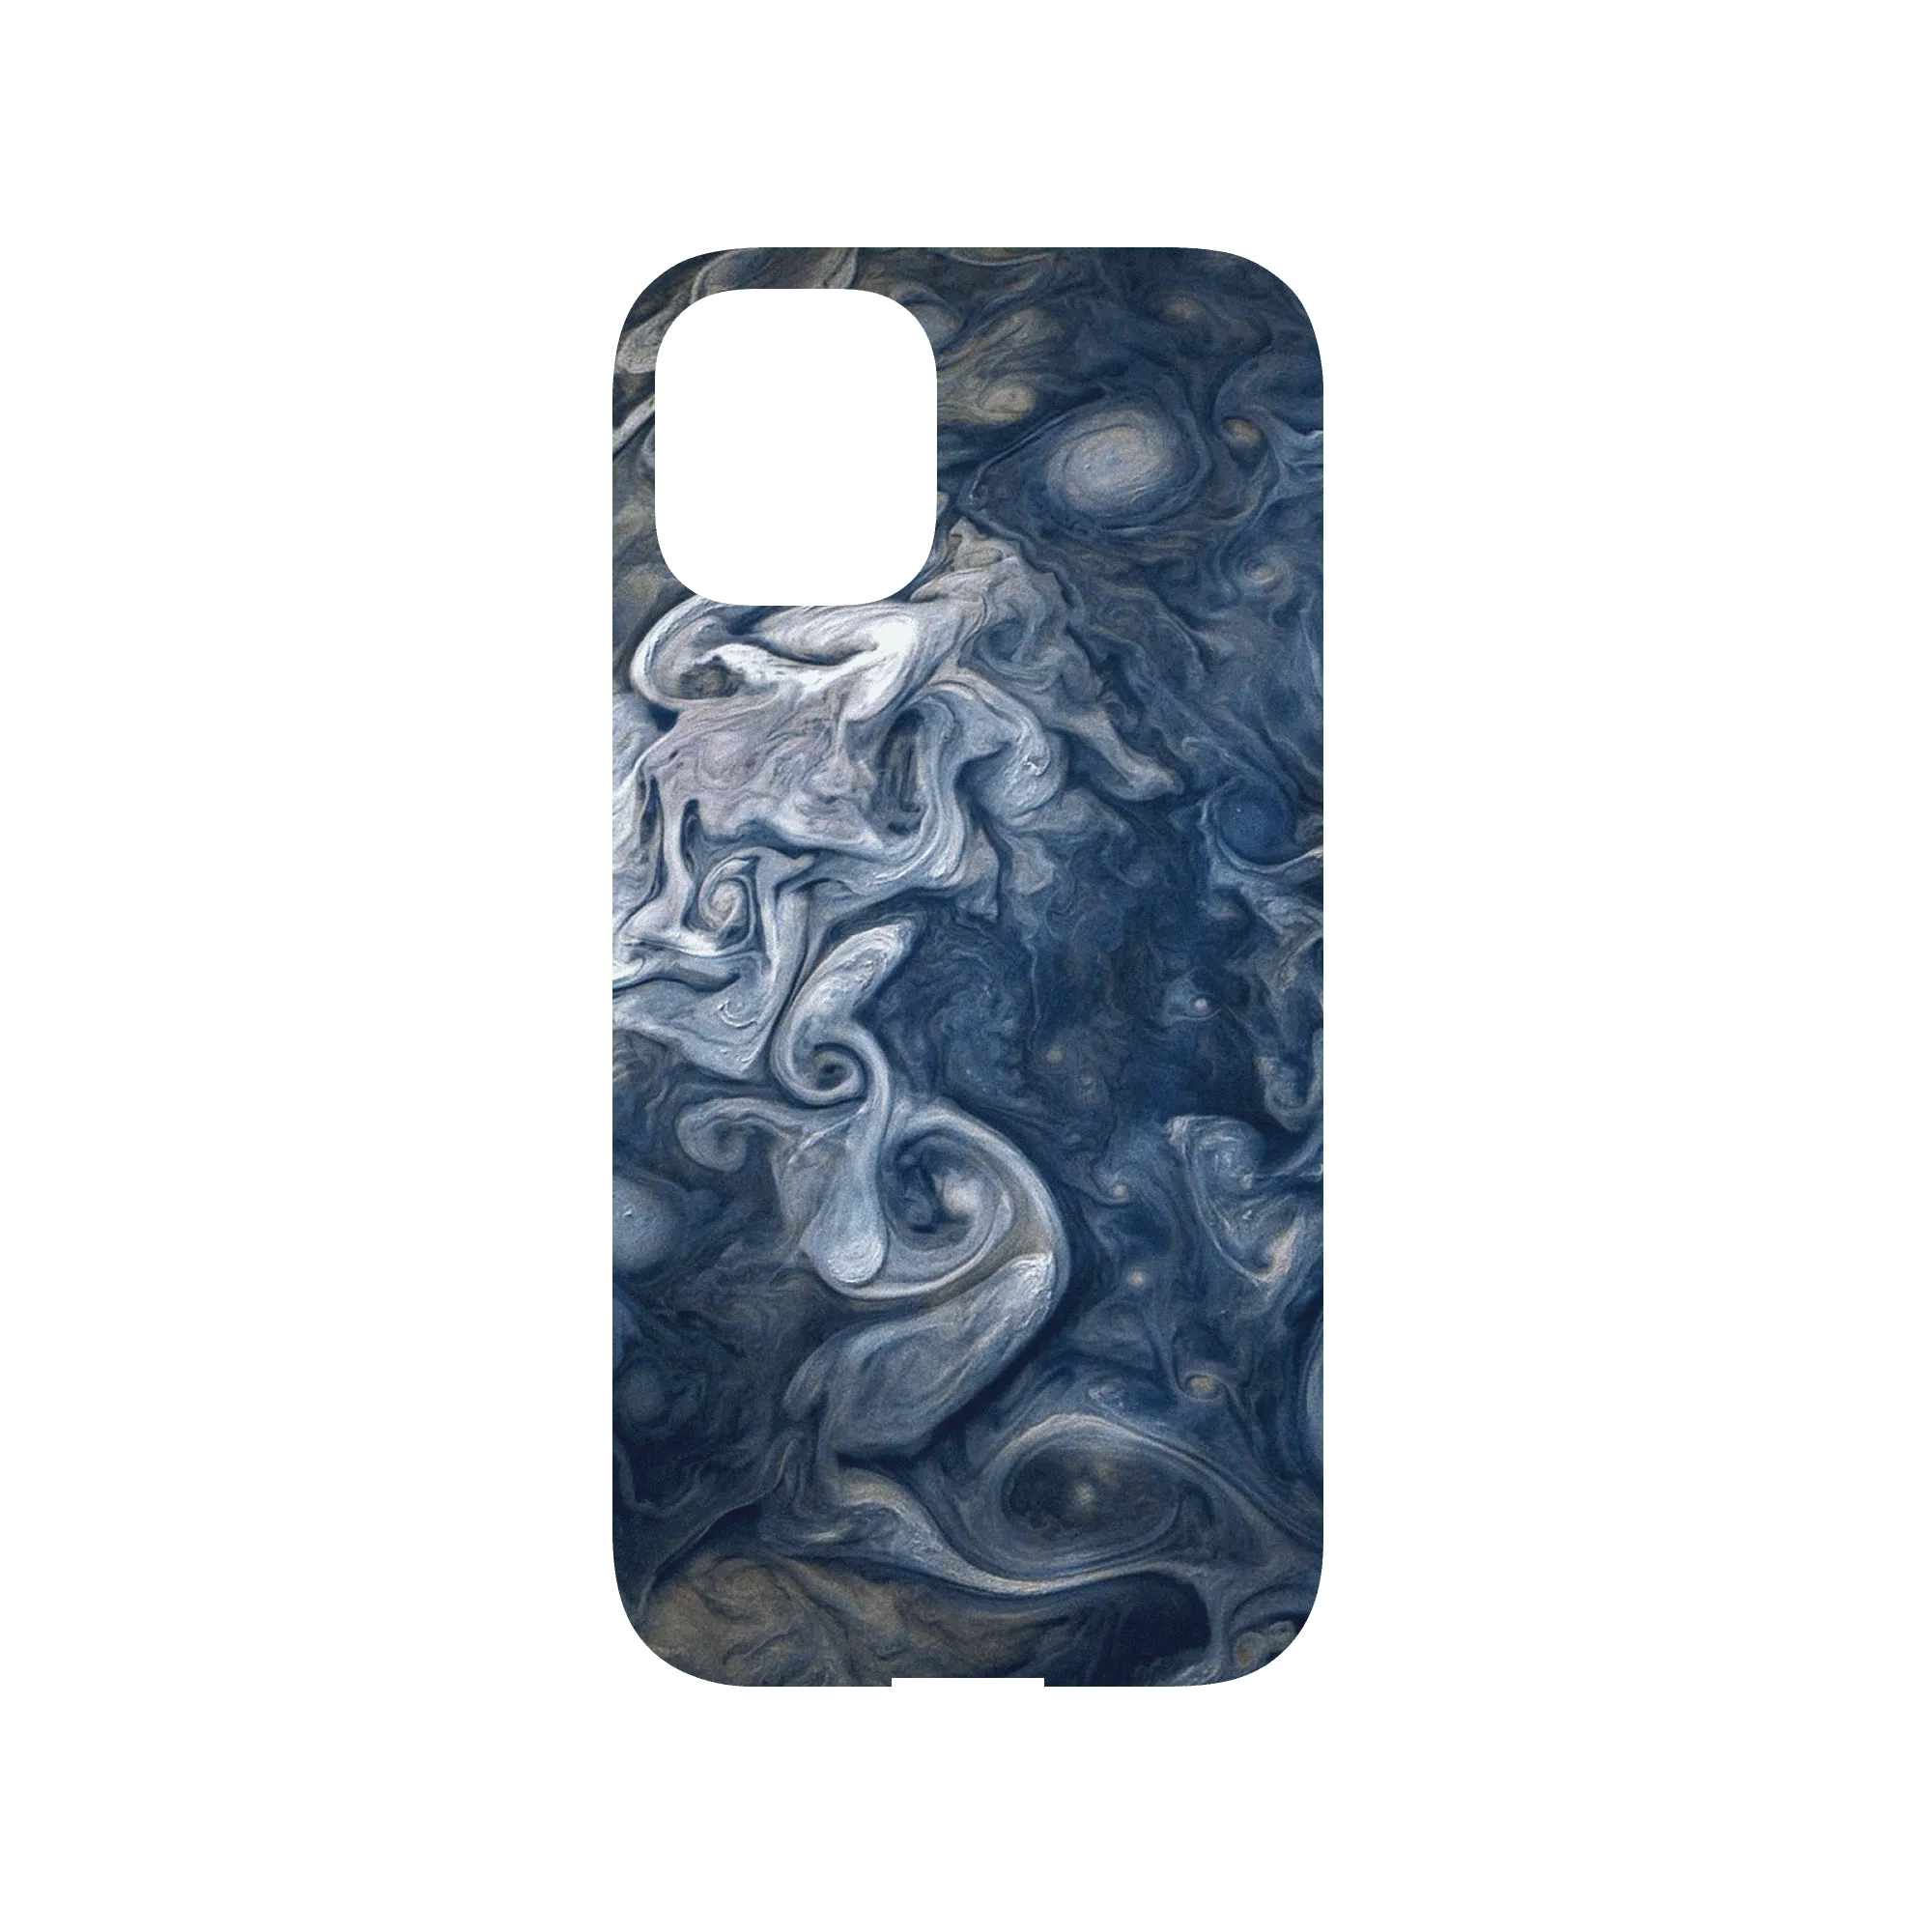 Cosmos Mod NX (MagSafe compatible) iPhone 12 mini Case - Jupiter - Swirling Clouds Backplate